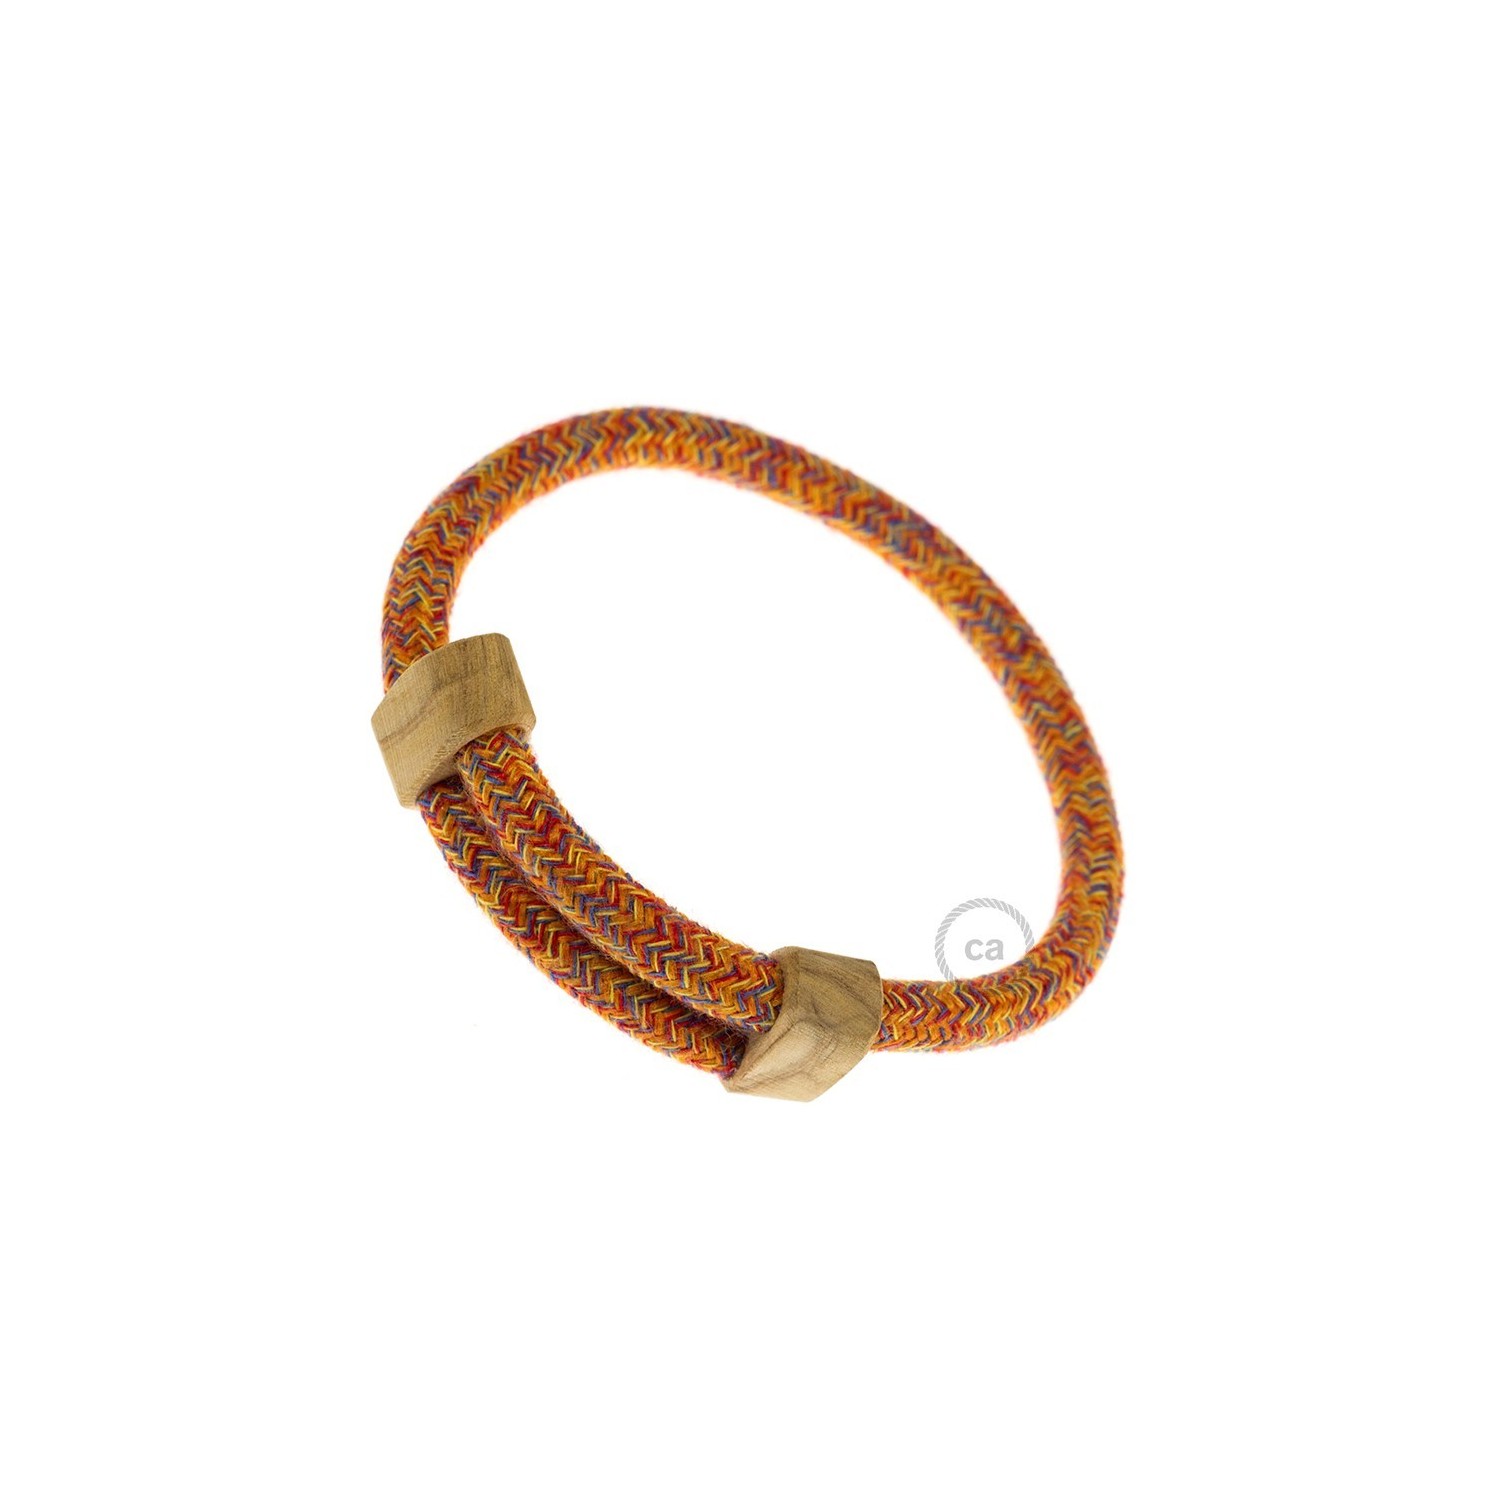 Creative-Bracelet in Cotton Indian Summer RX07. Wood sliding fastening. Made in Italy.